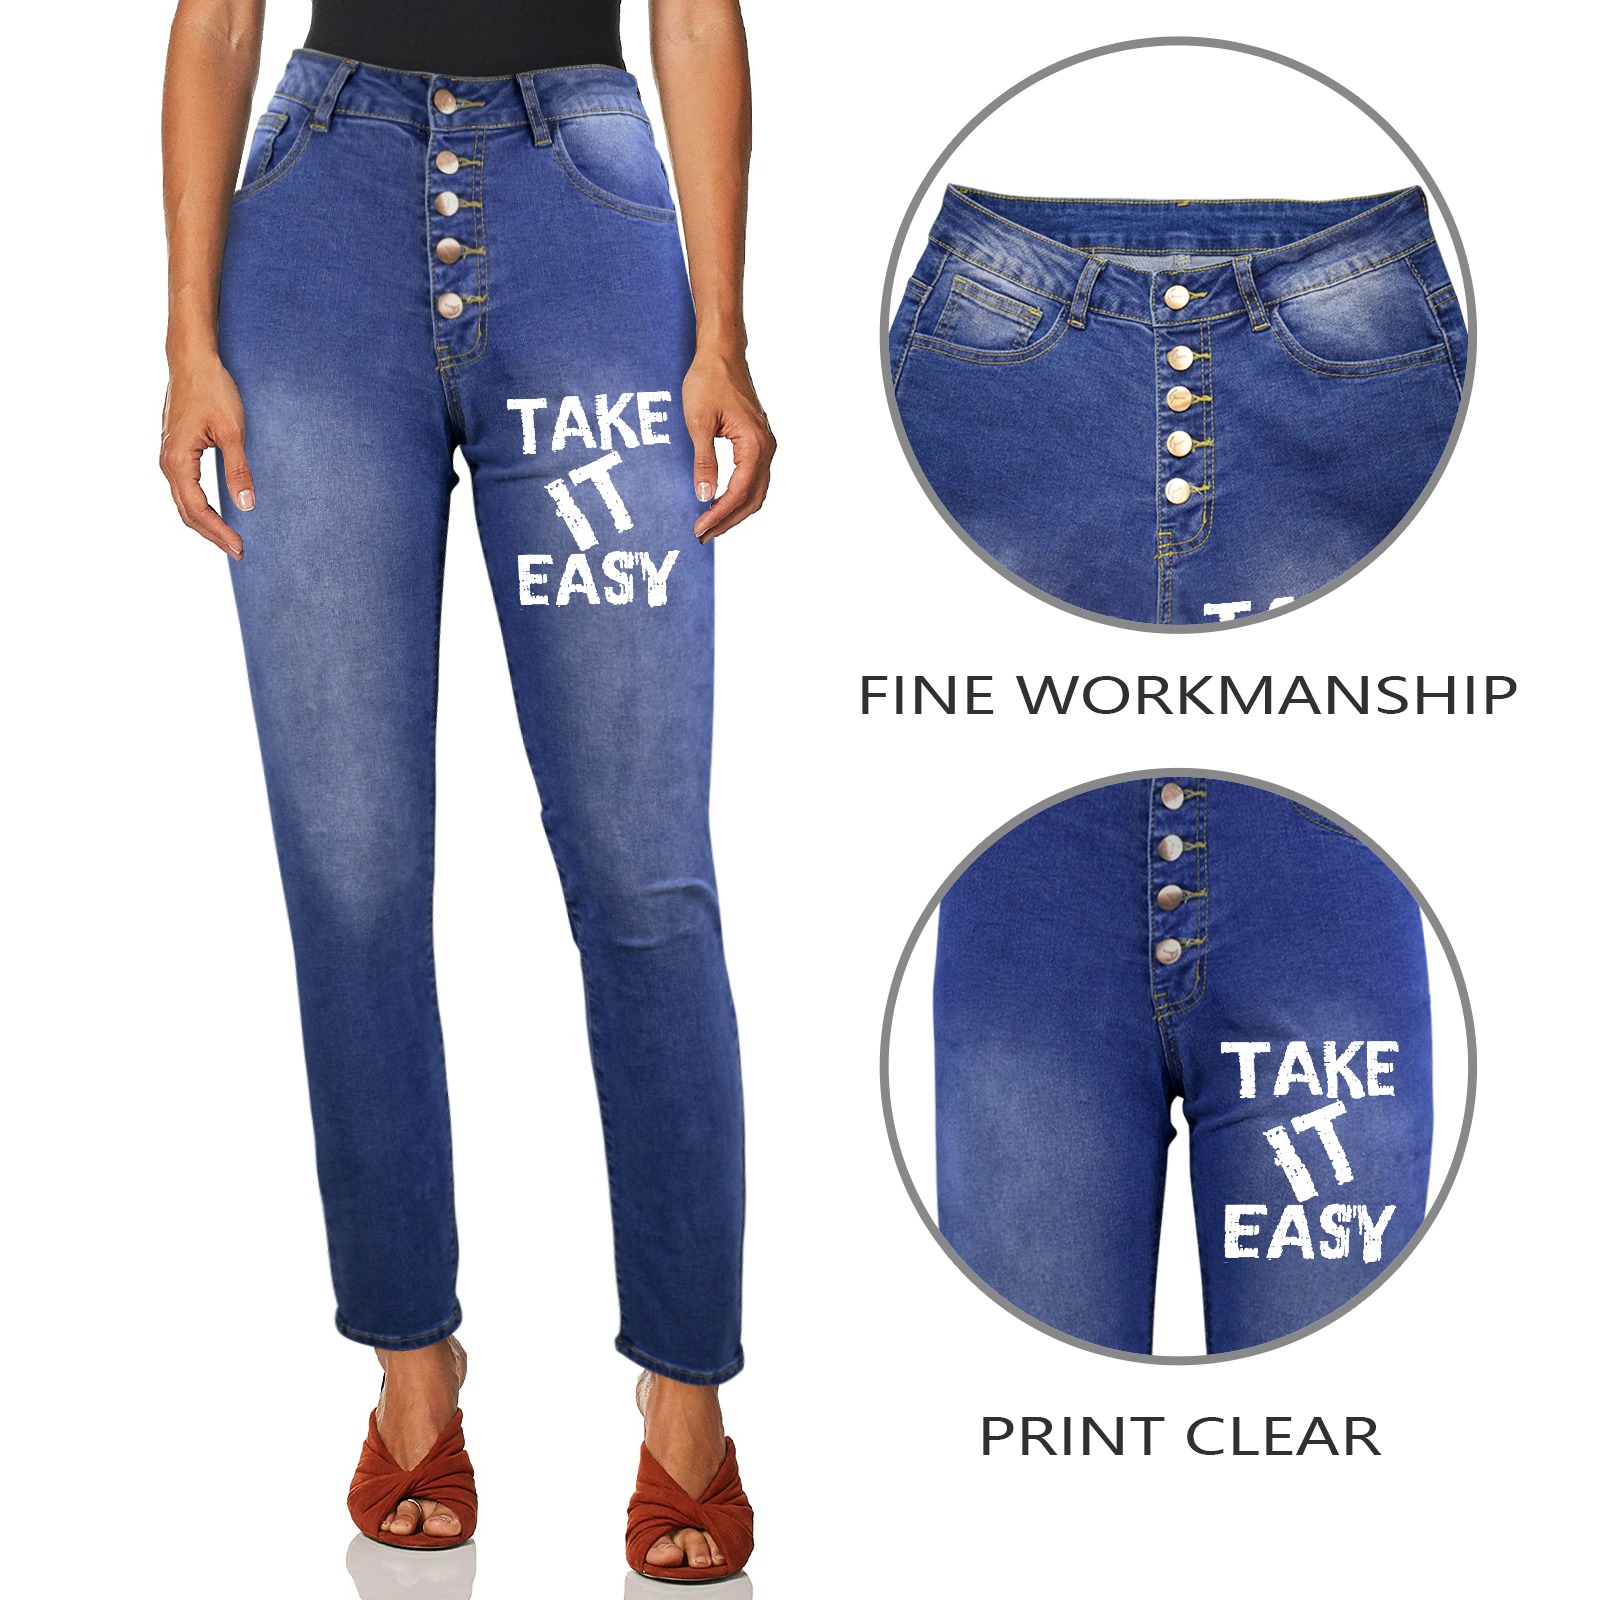 Take it easy charming white text, typography art. Women's Jeans (Front Printing)